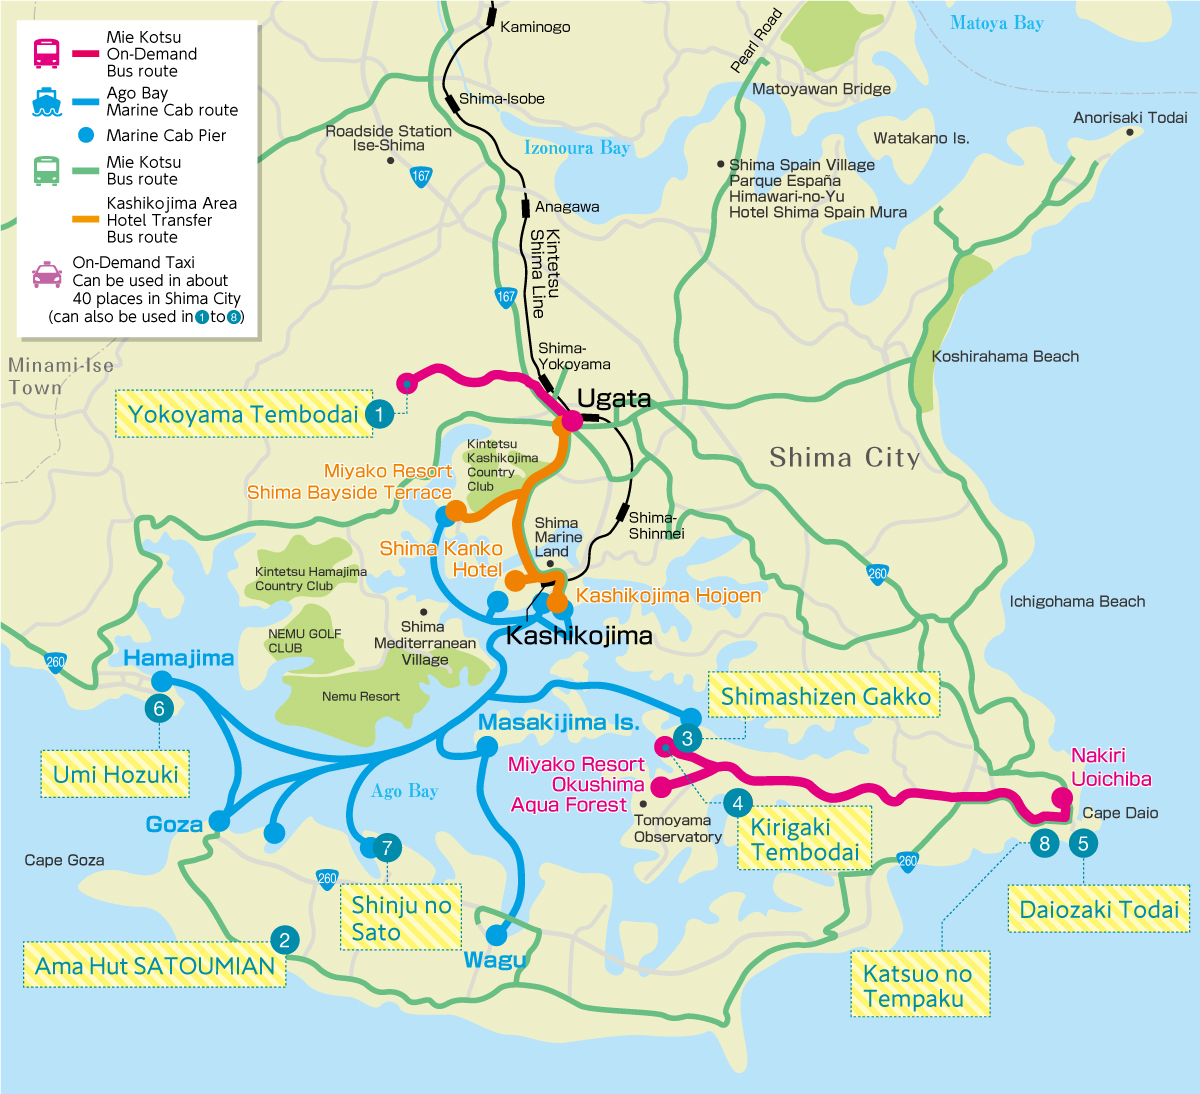 Shima’s primary tourist spots and route MAP